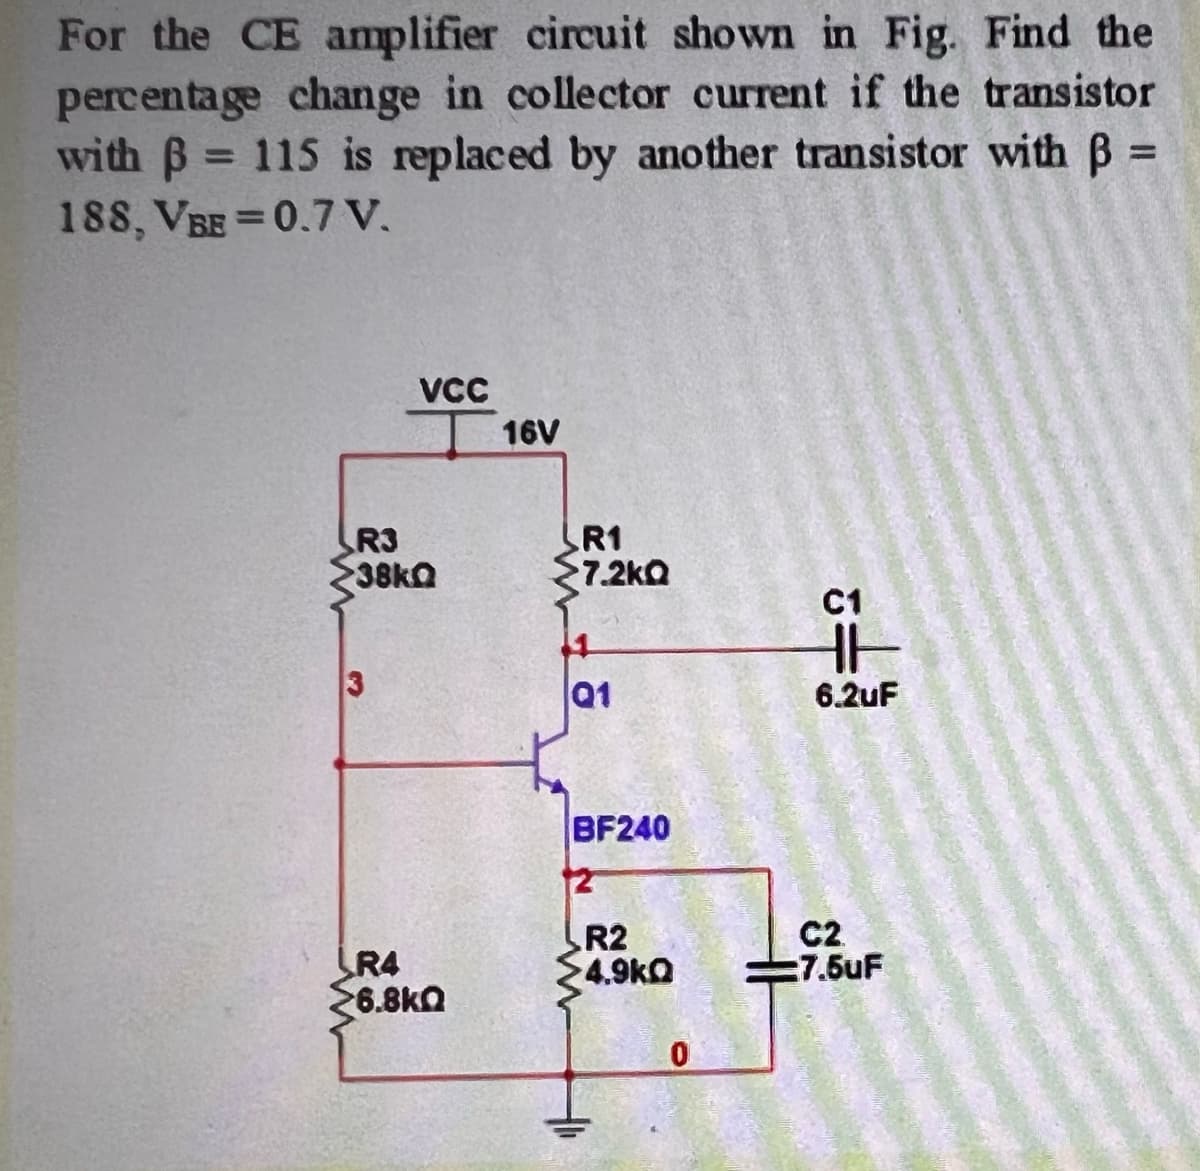 For the CE amplifier circuit shown in Fig. Find the
percentage change in collector current if the transistor
with B 115 is replaced by another transistor with B =
188, VBE =0.7 V.
%3D
%D
VCC
16V
R3
38k
R1
7.2kQ
C1
Q1
6.2uF
BF240
12
LR4
6.8kQ
R2
4.9kO
C2
:7.5uF
